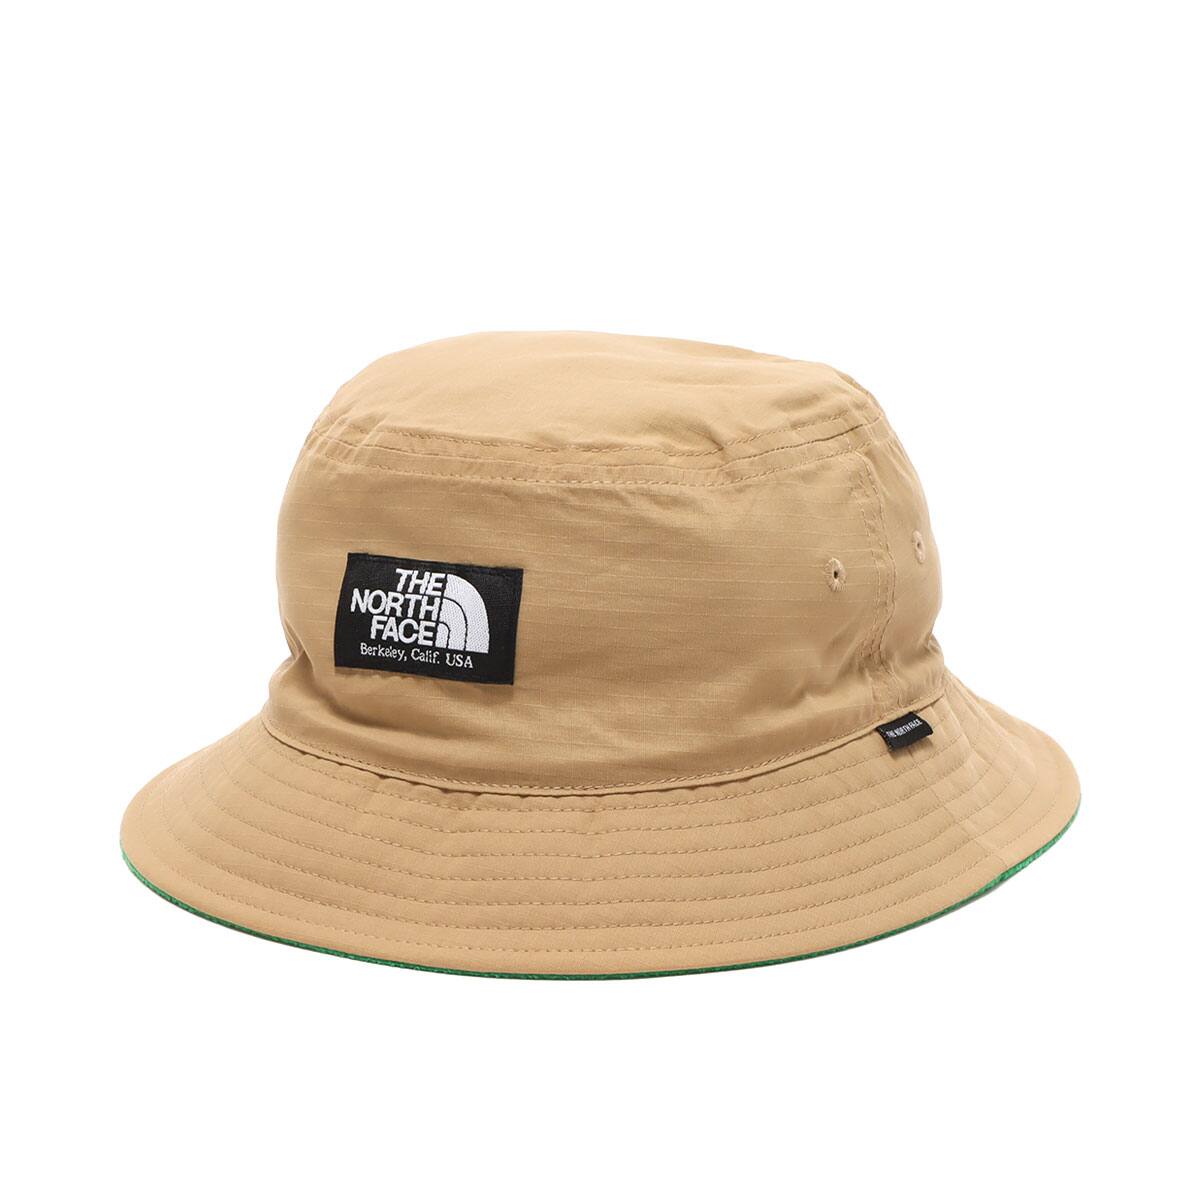 THE NORTH FACE REVERSIBLE FLEECE BUCKET HAT ケルプタン 21FW-I_photo_large